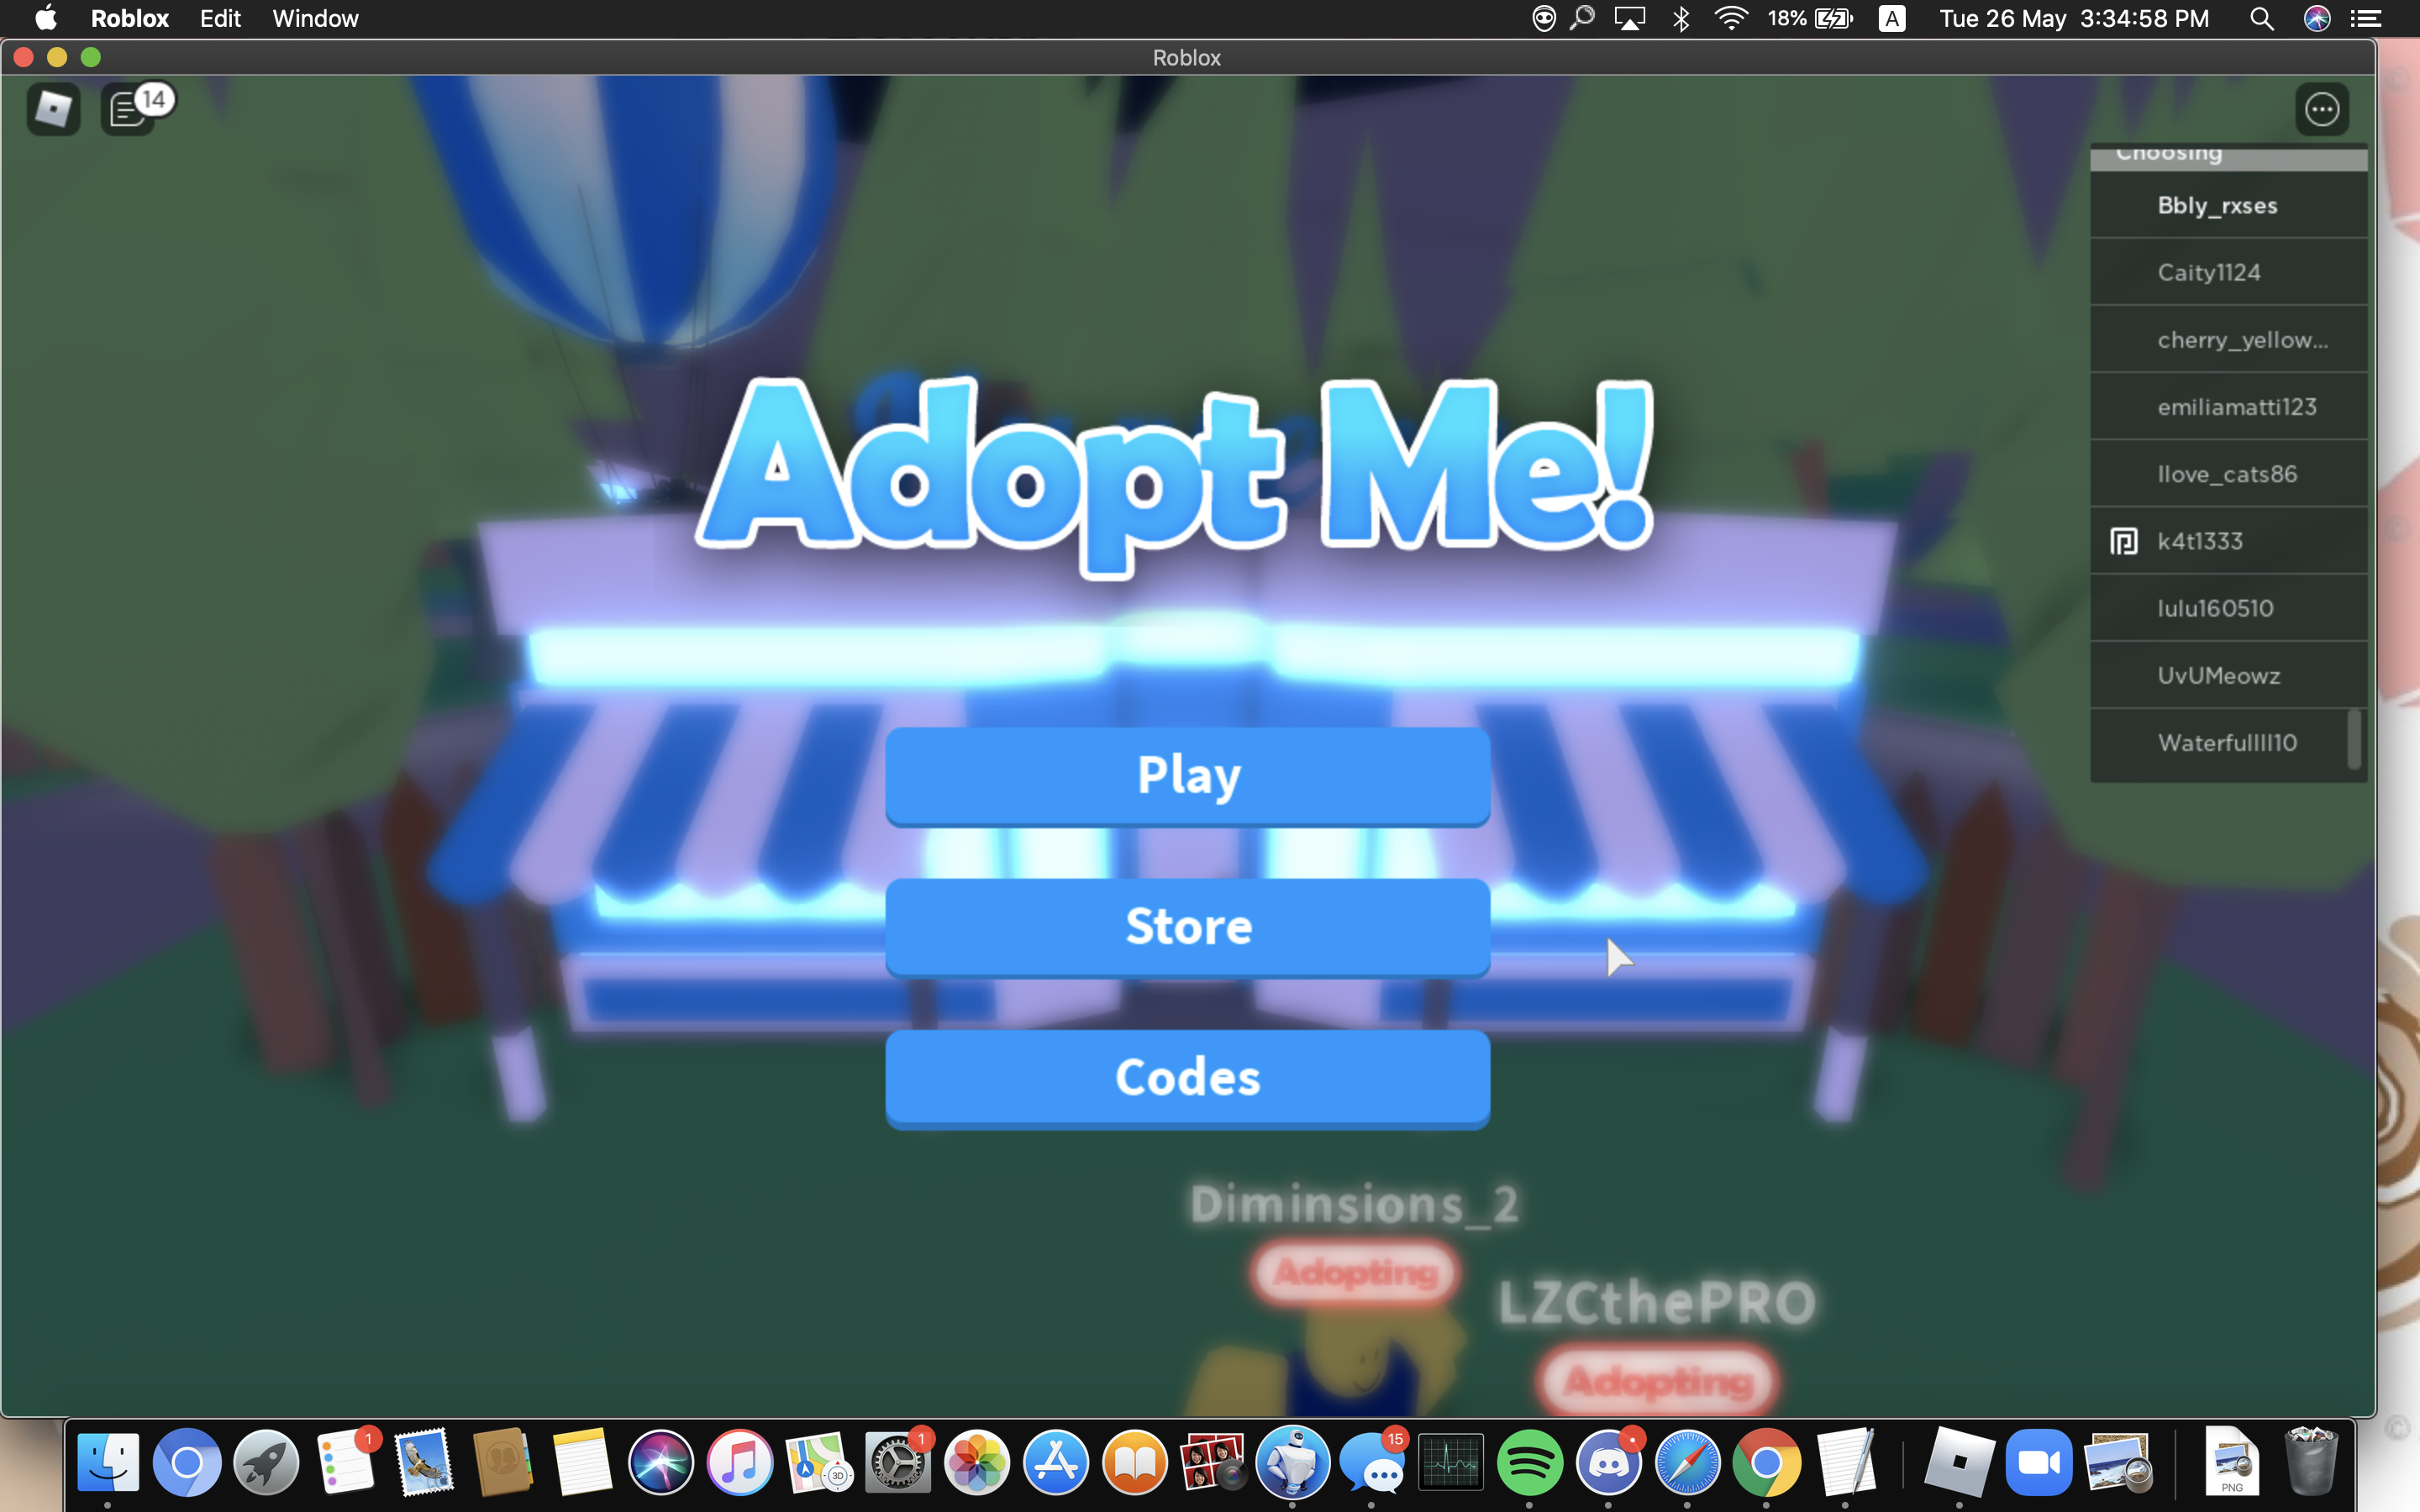 Went And Played Adopt Me Legacy D Link Below Fandom - game adopt me in roblox